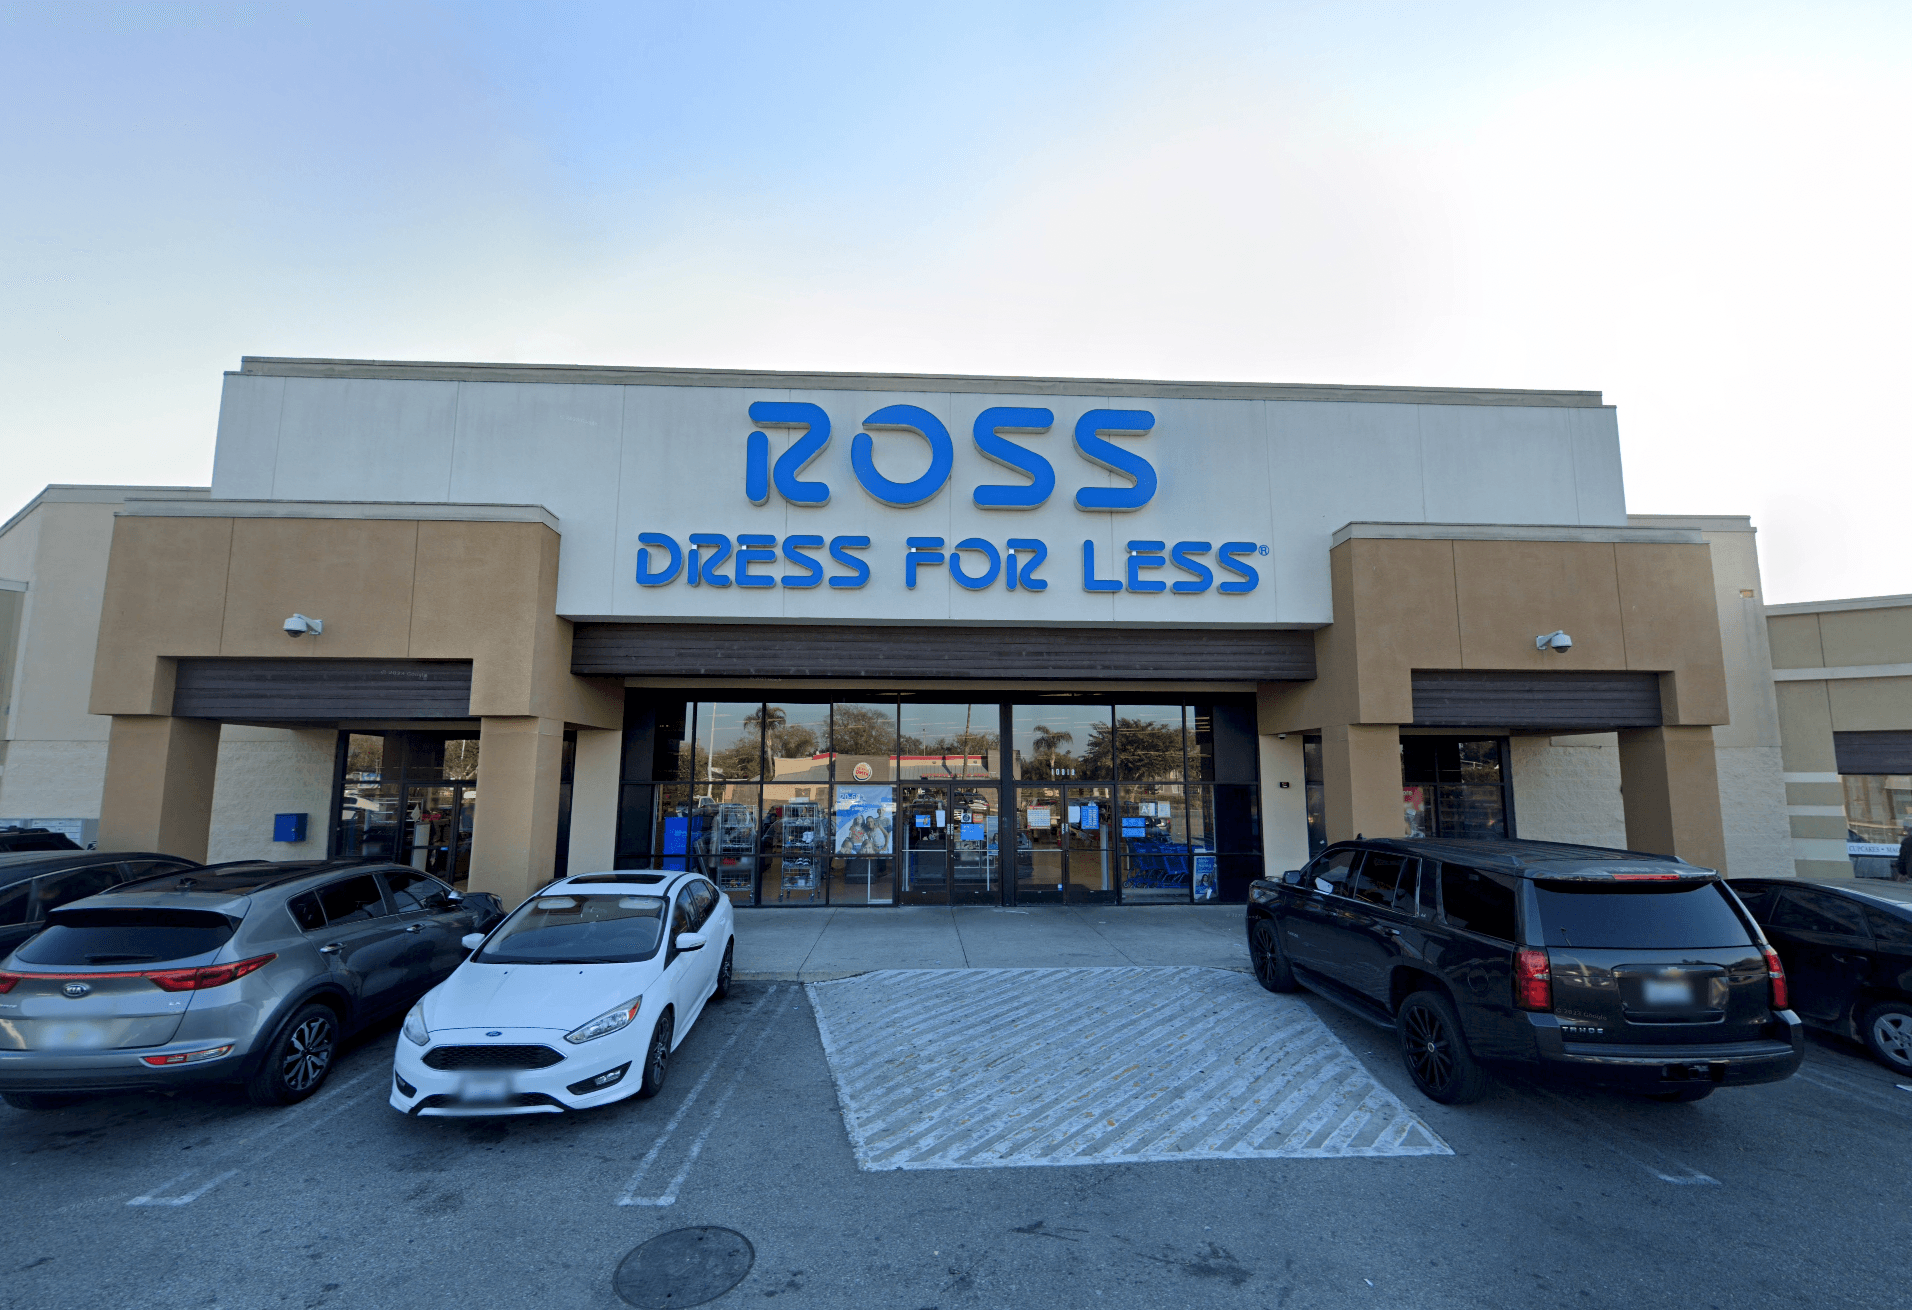 4 Men Charged With Retail Theft at 2 Ross Stores in Los Angeles